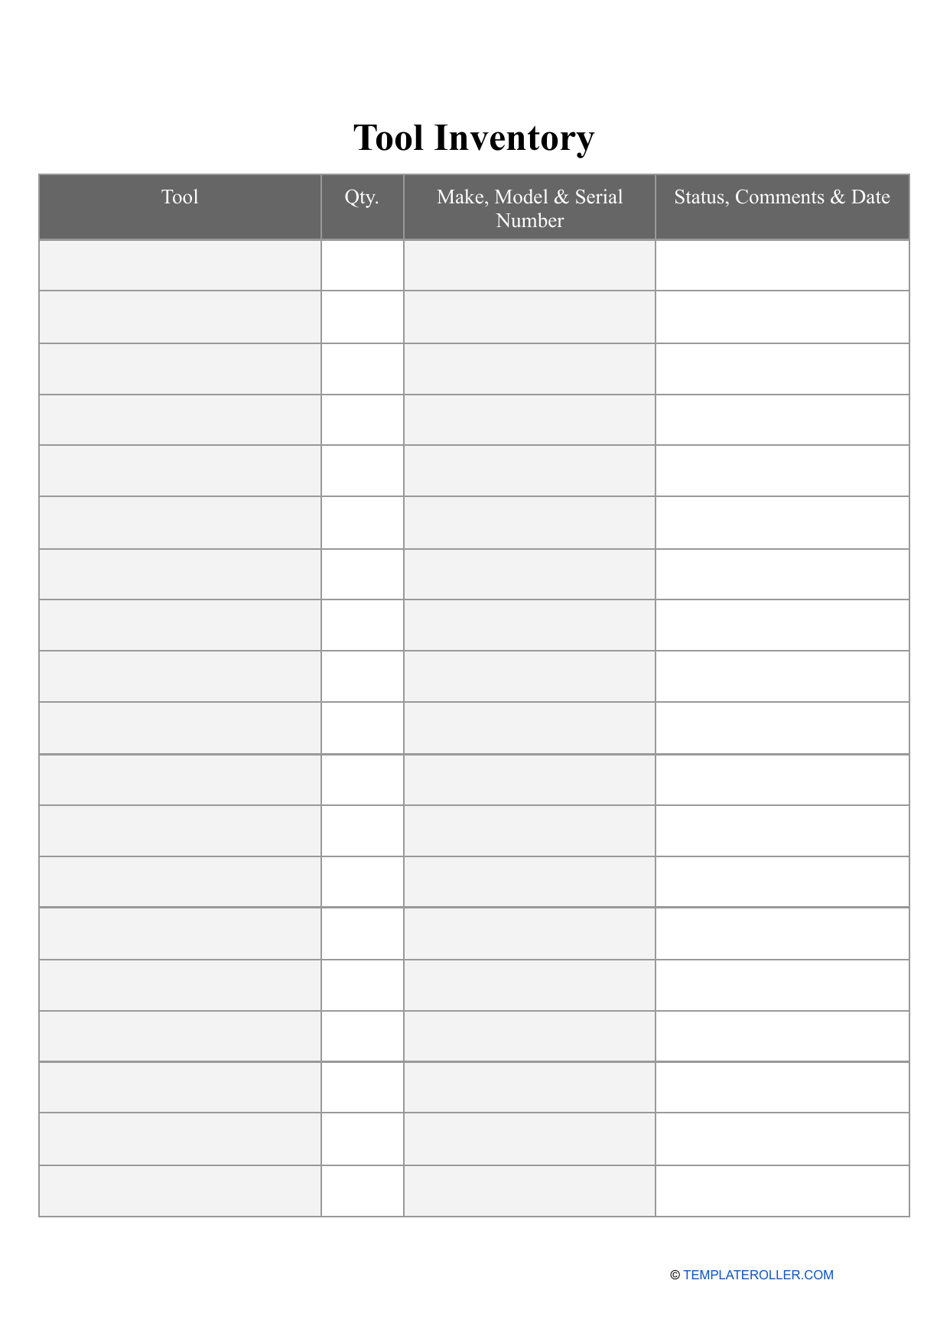 Tool Inventory Template Fill Out, Sign Online and Download PDF